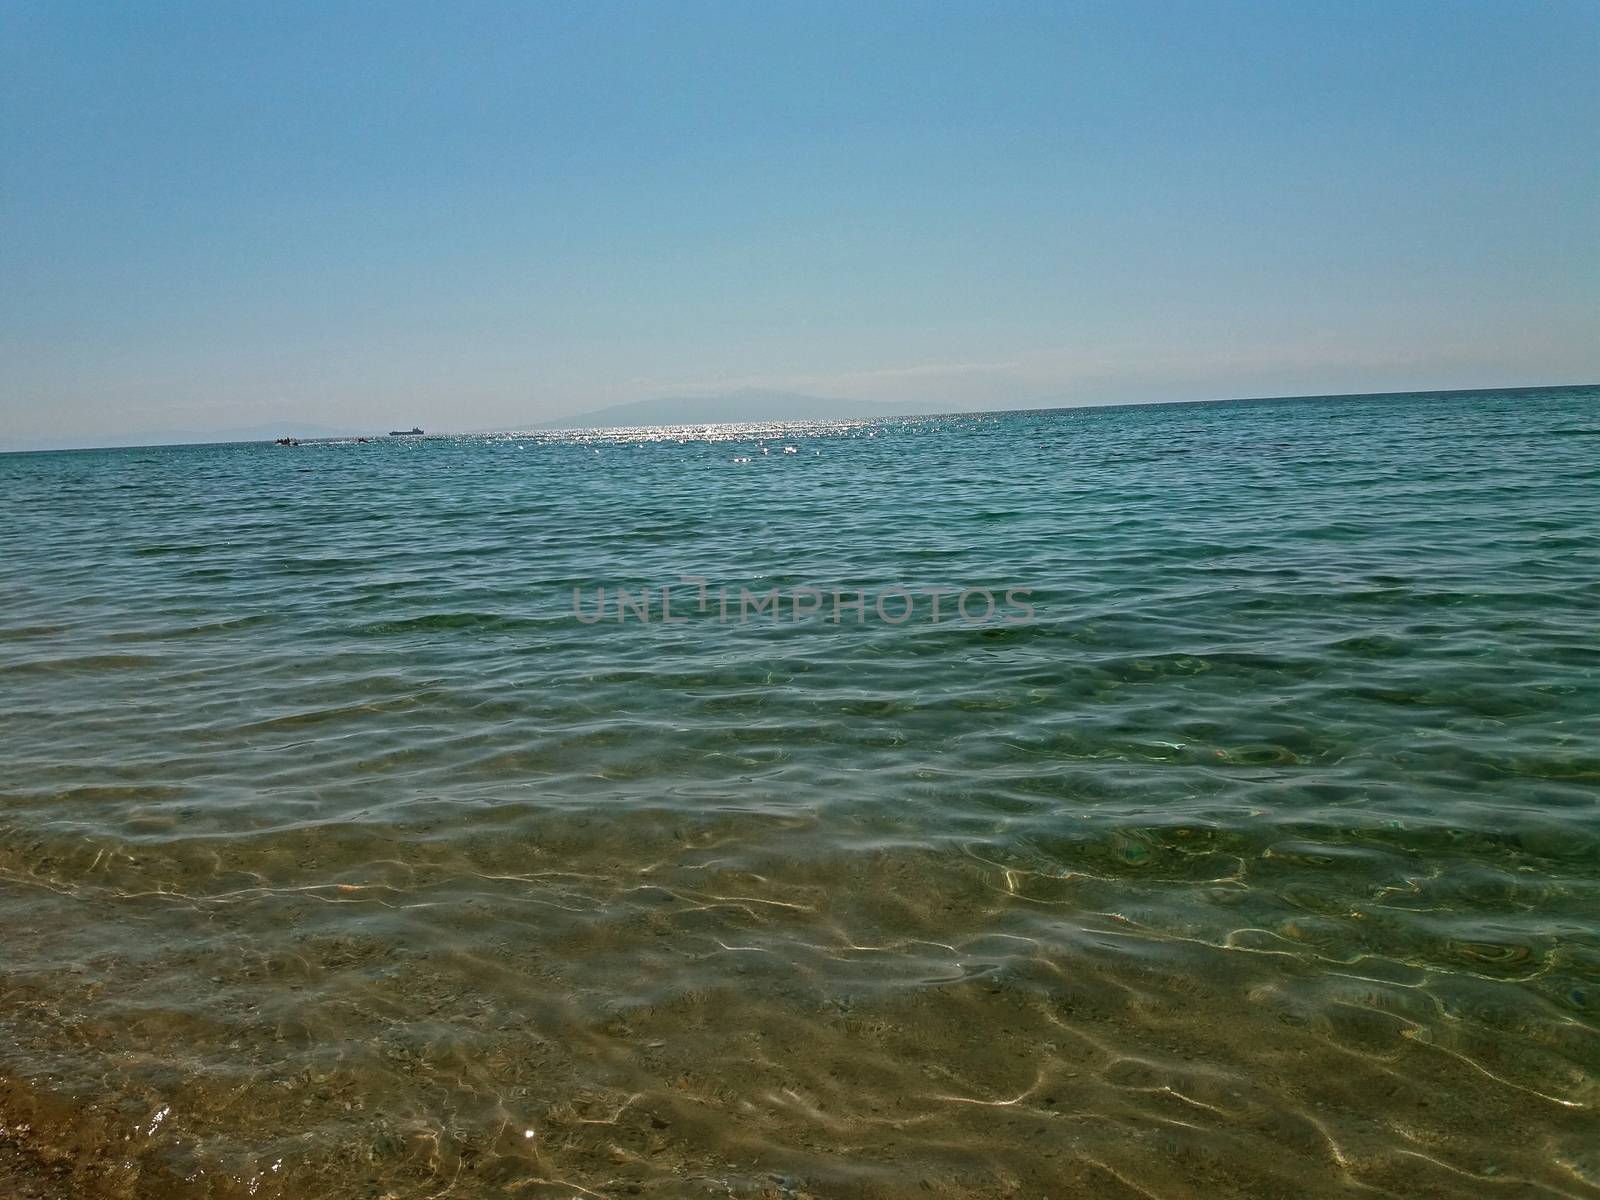 The Mediterranean Sea in Greece and clear sky by Mindru